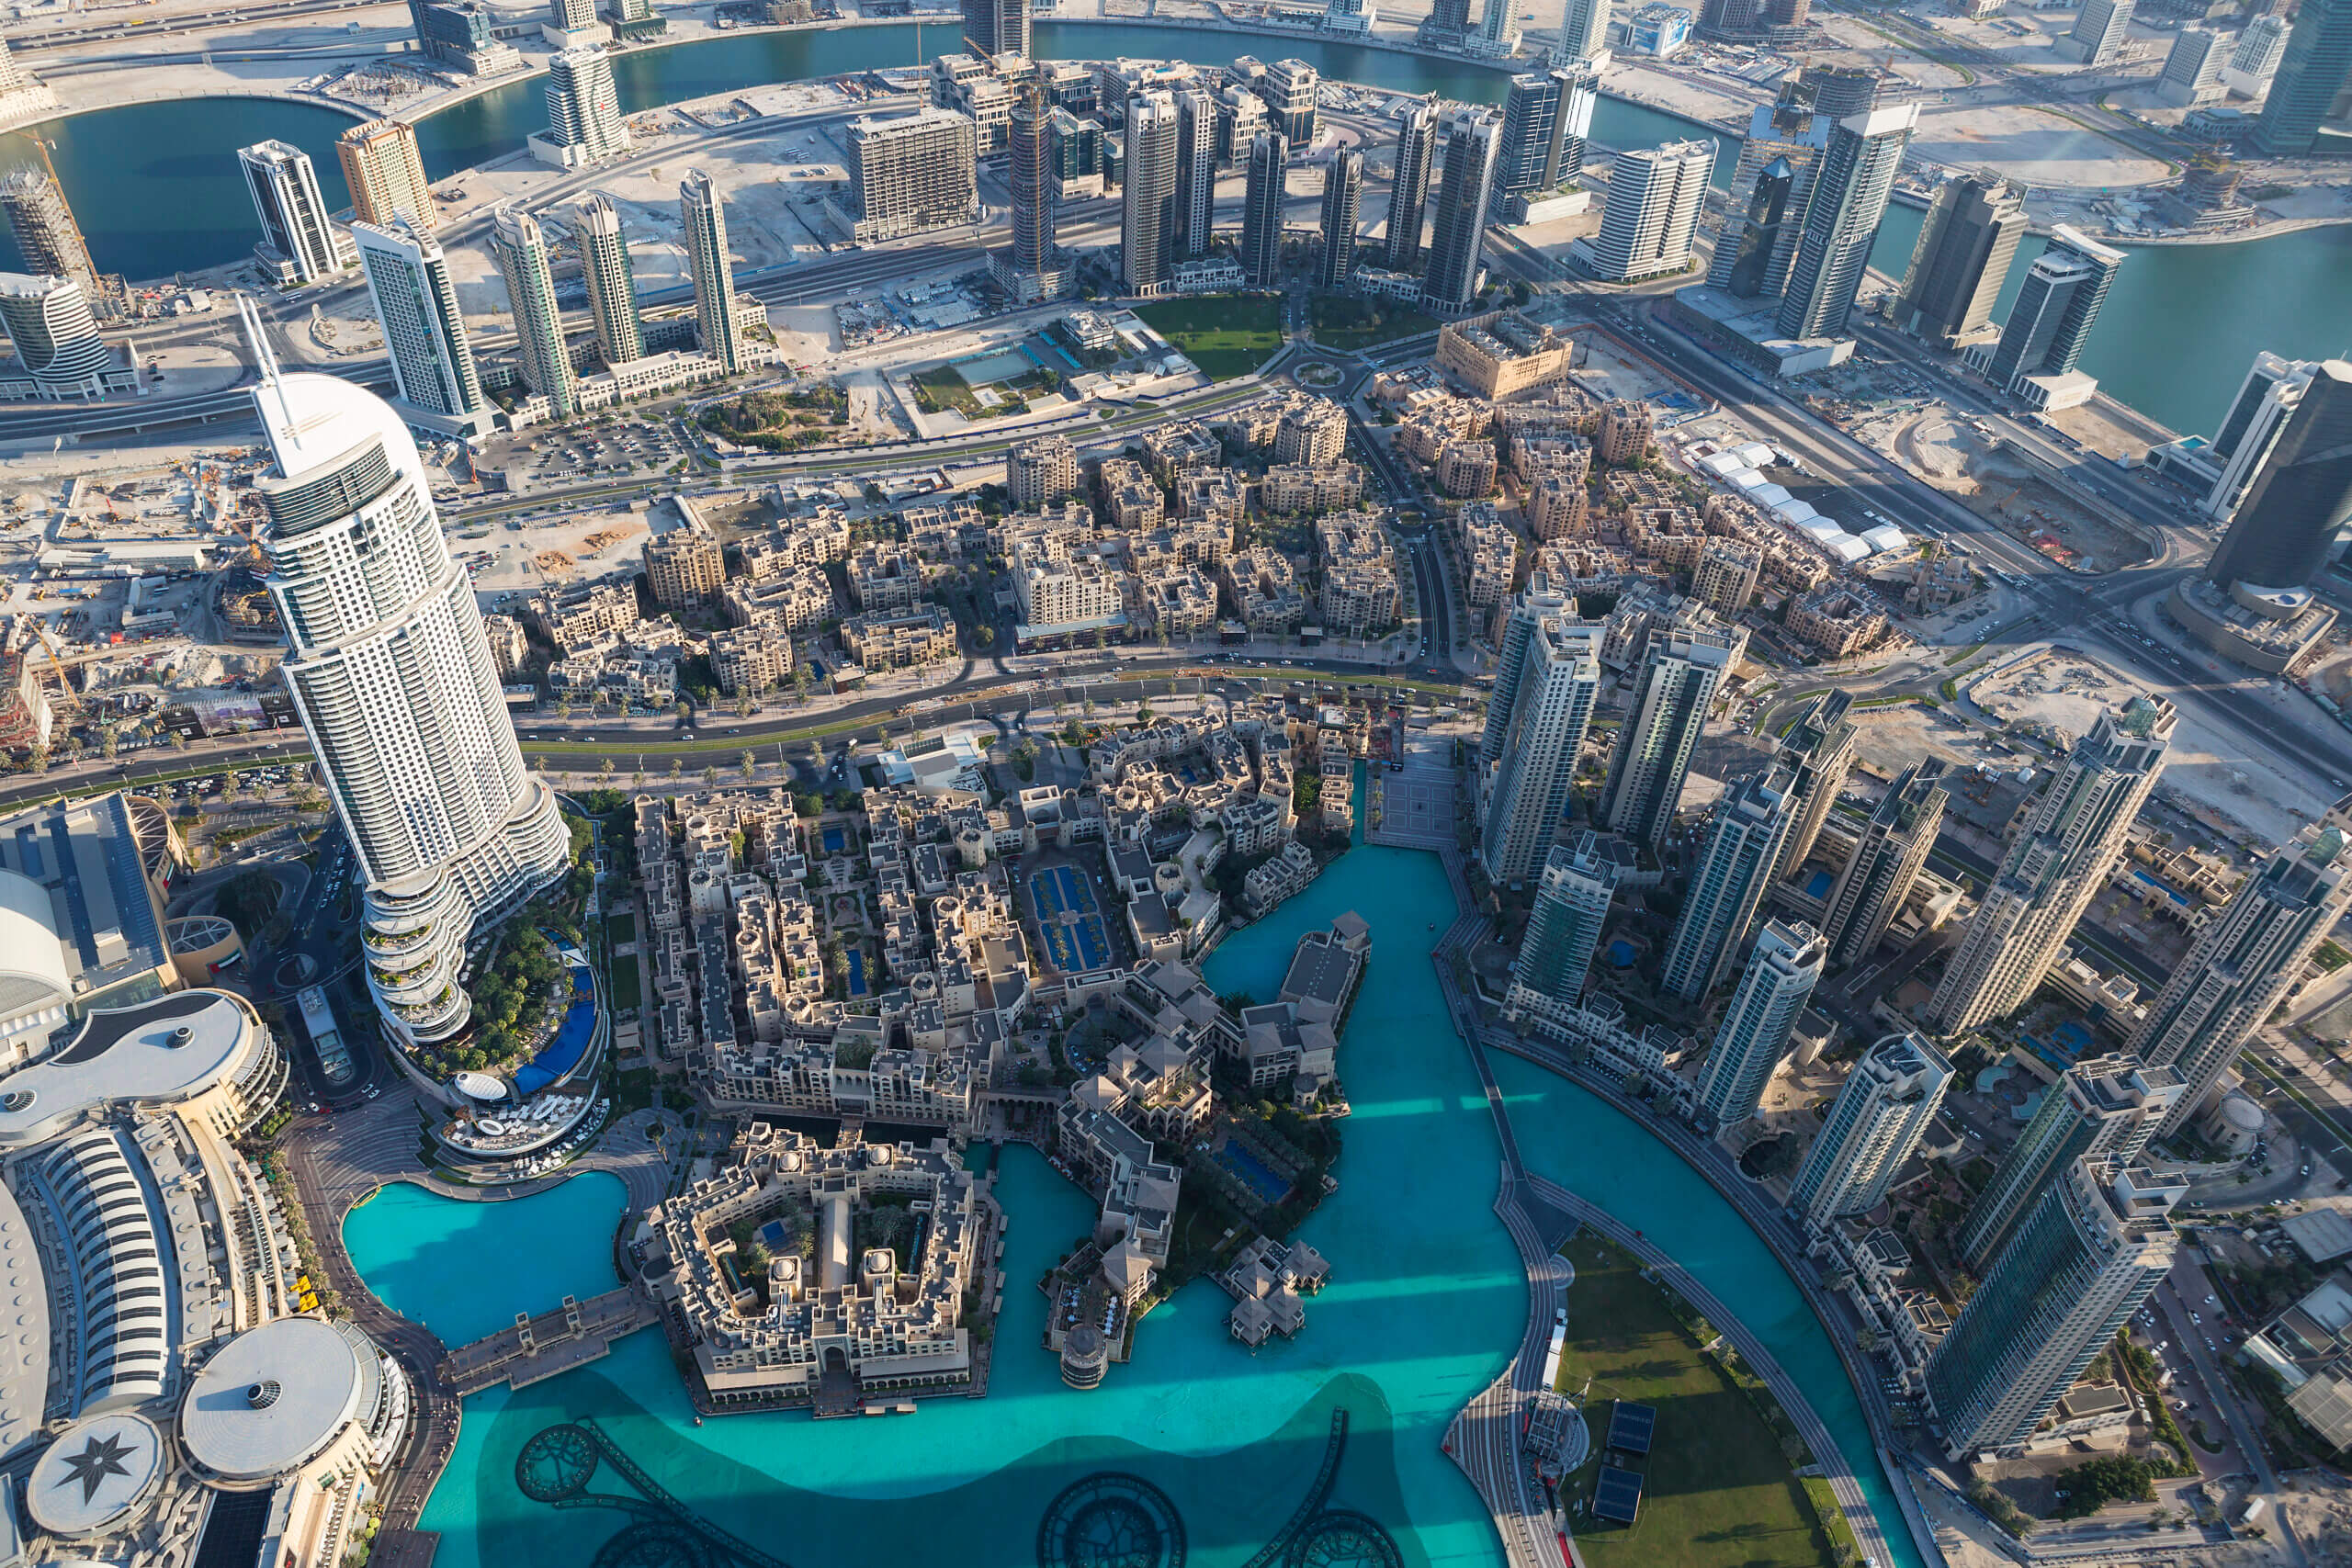 Panoramic aerial view of Dubai cityscape with iconic landmarks and luxurious properties showcased by Dubai Estate Agency.